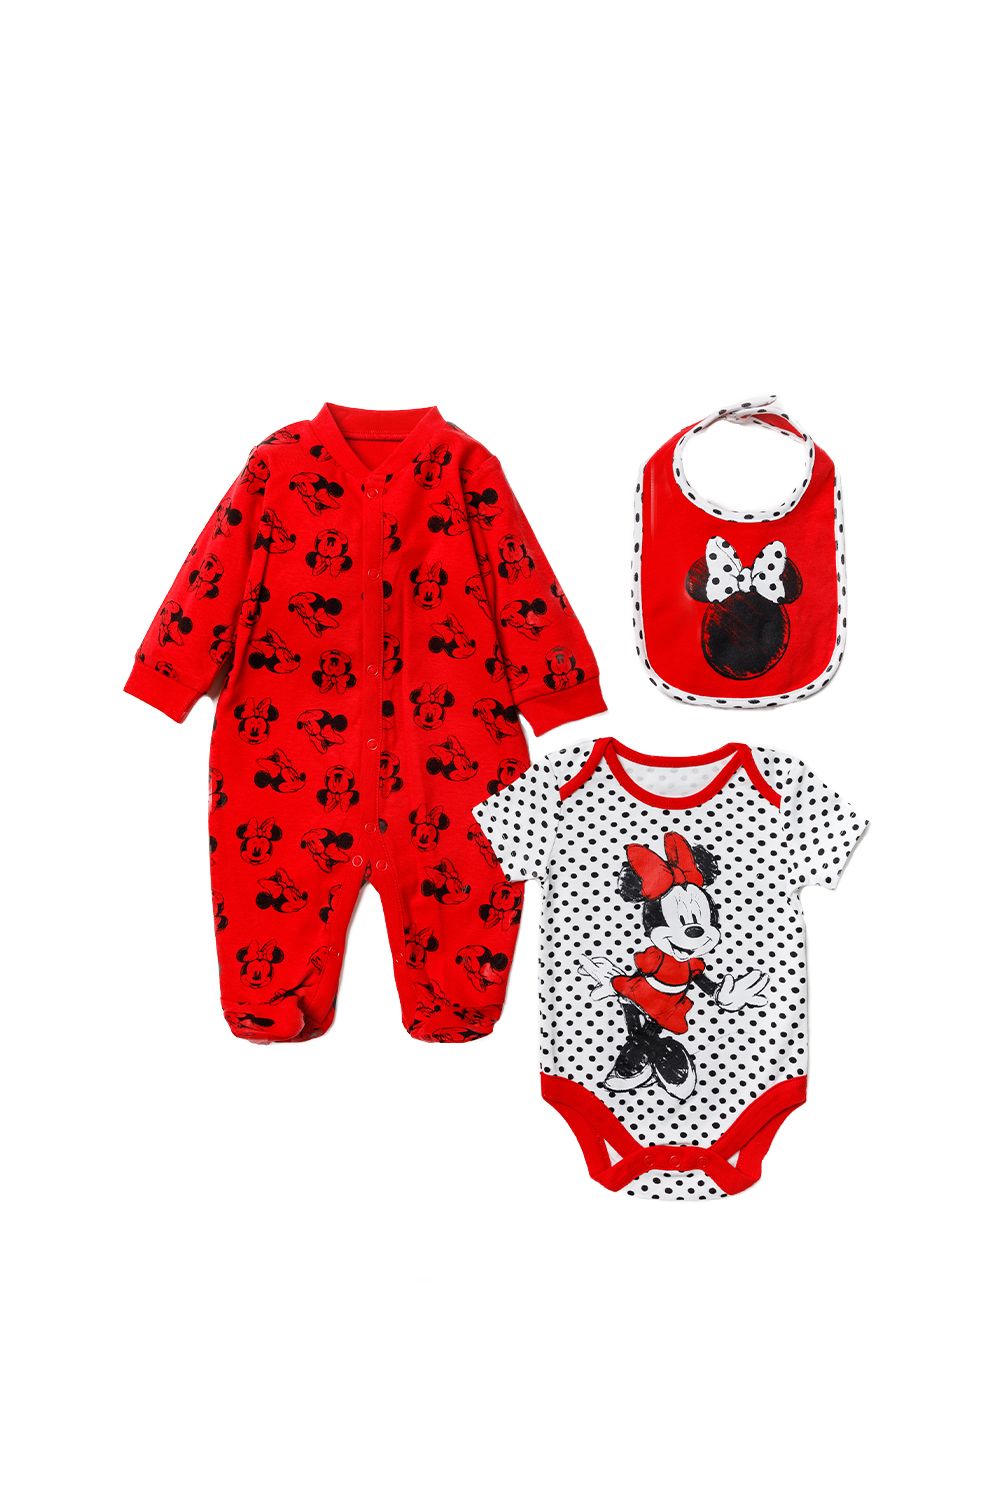 This adorable Disney Baby three-piece set features a classic Minnie Mouse print. The set includes an all-over, spotted print bodysuit, a footed sleepsuit and a matching bib! Each item in the set is cotton with popper fastenings, keeping your little one comfortable. This would be a lovely baby shower gift for the little one in your life!